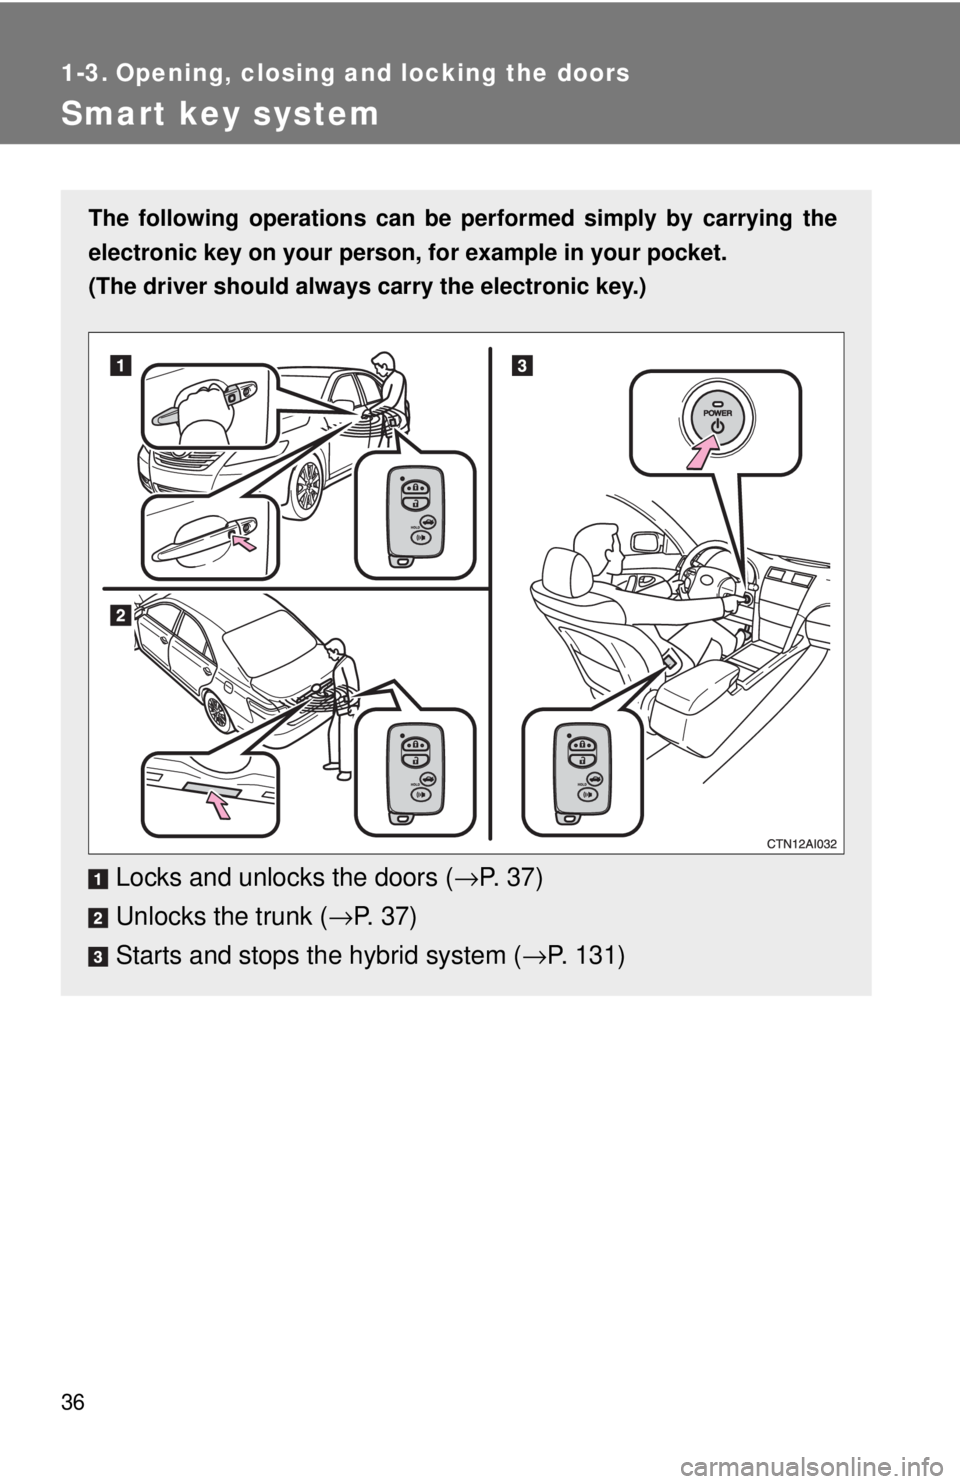 TOYOTA CAMRY HV 2009 Owners Guide 36
1-3. Opening, closing and locking the doors
Smart key system
The following operations can be performed simply by carrying the
electronic key on your person, for example in your pocket.
(The driver 